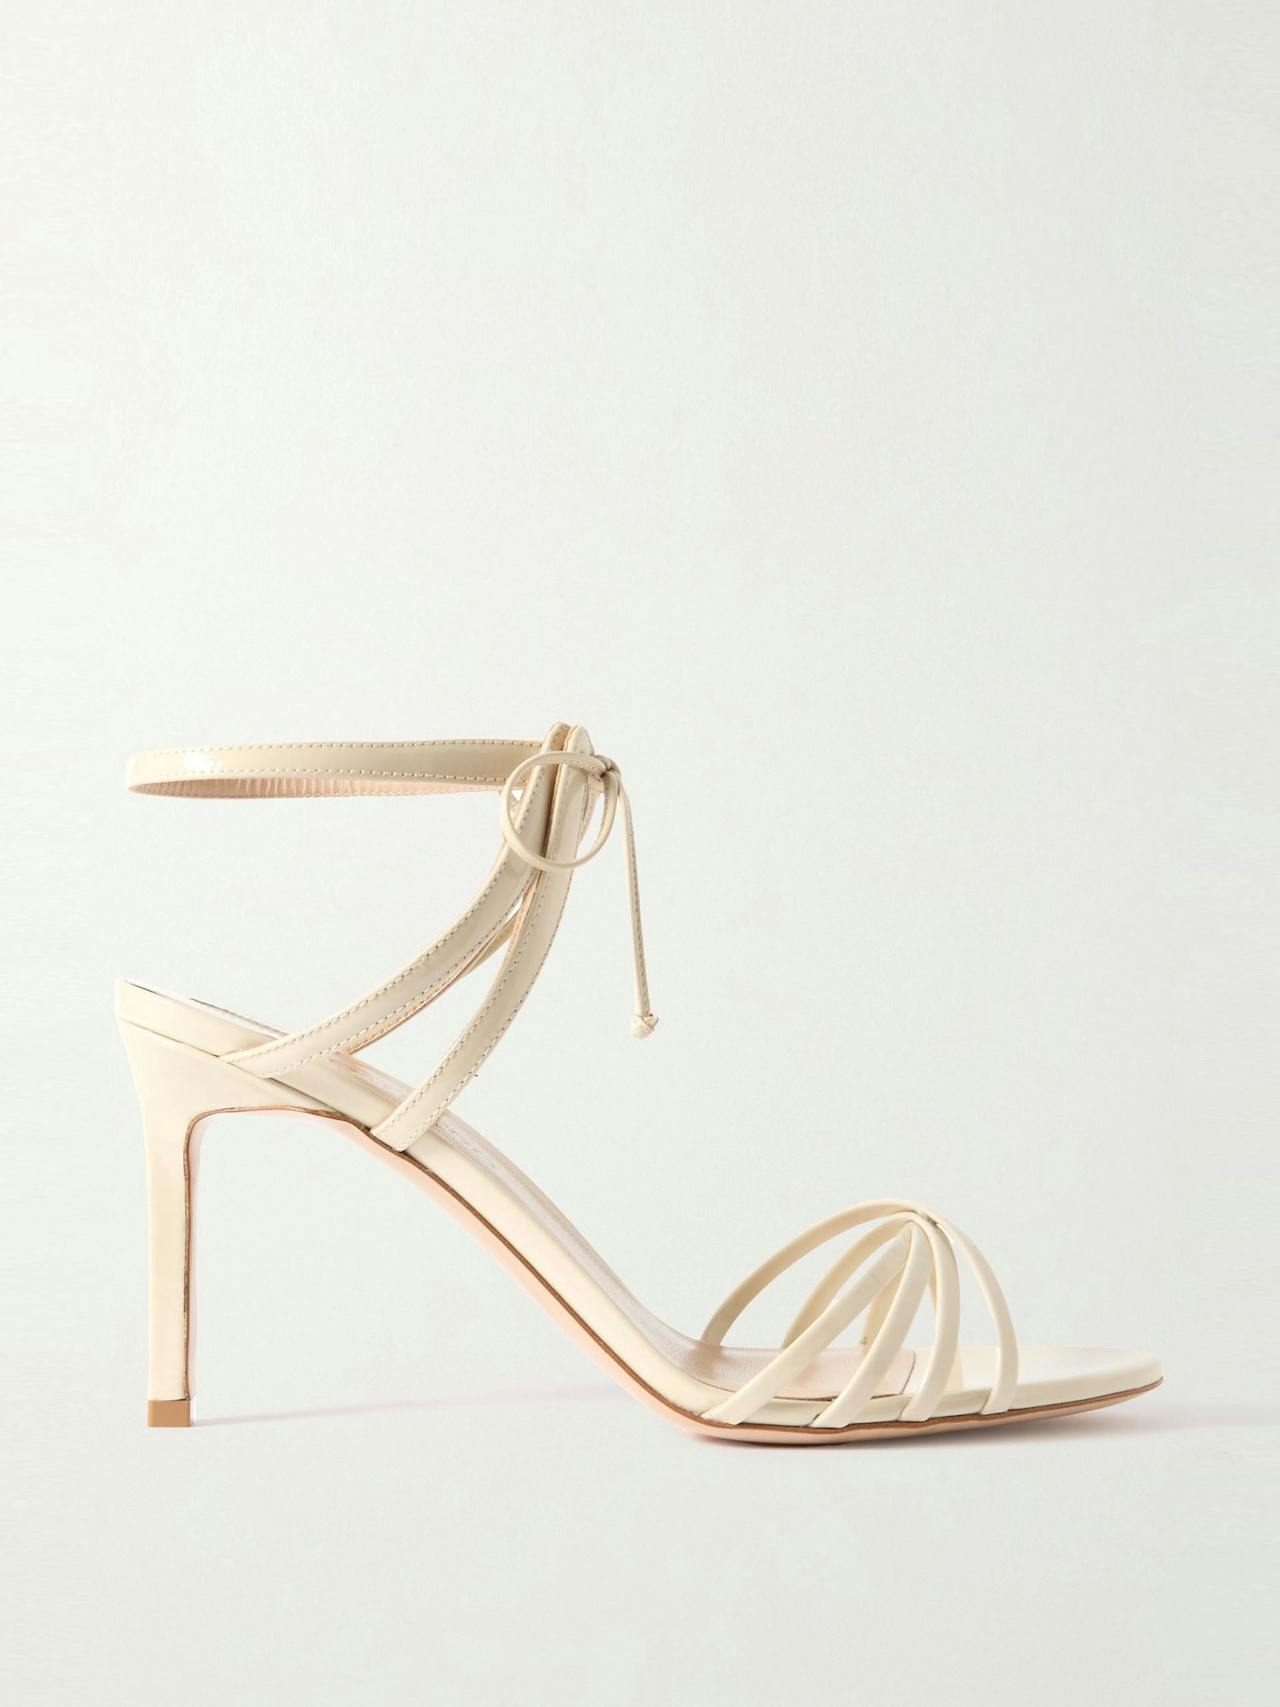 Patent-leather sandals